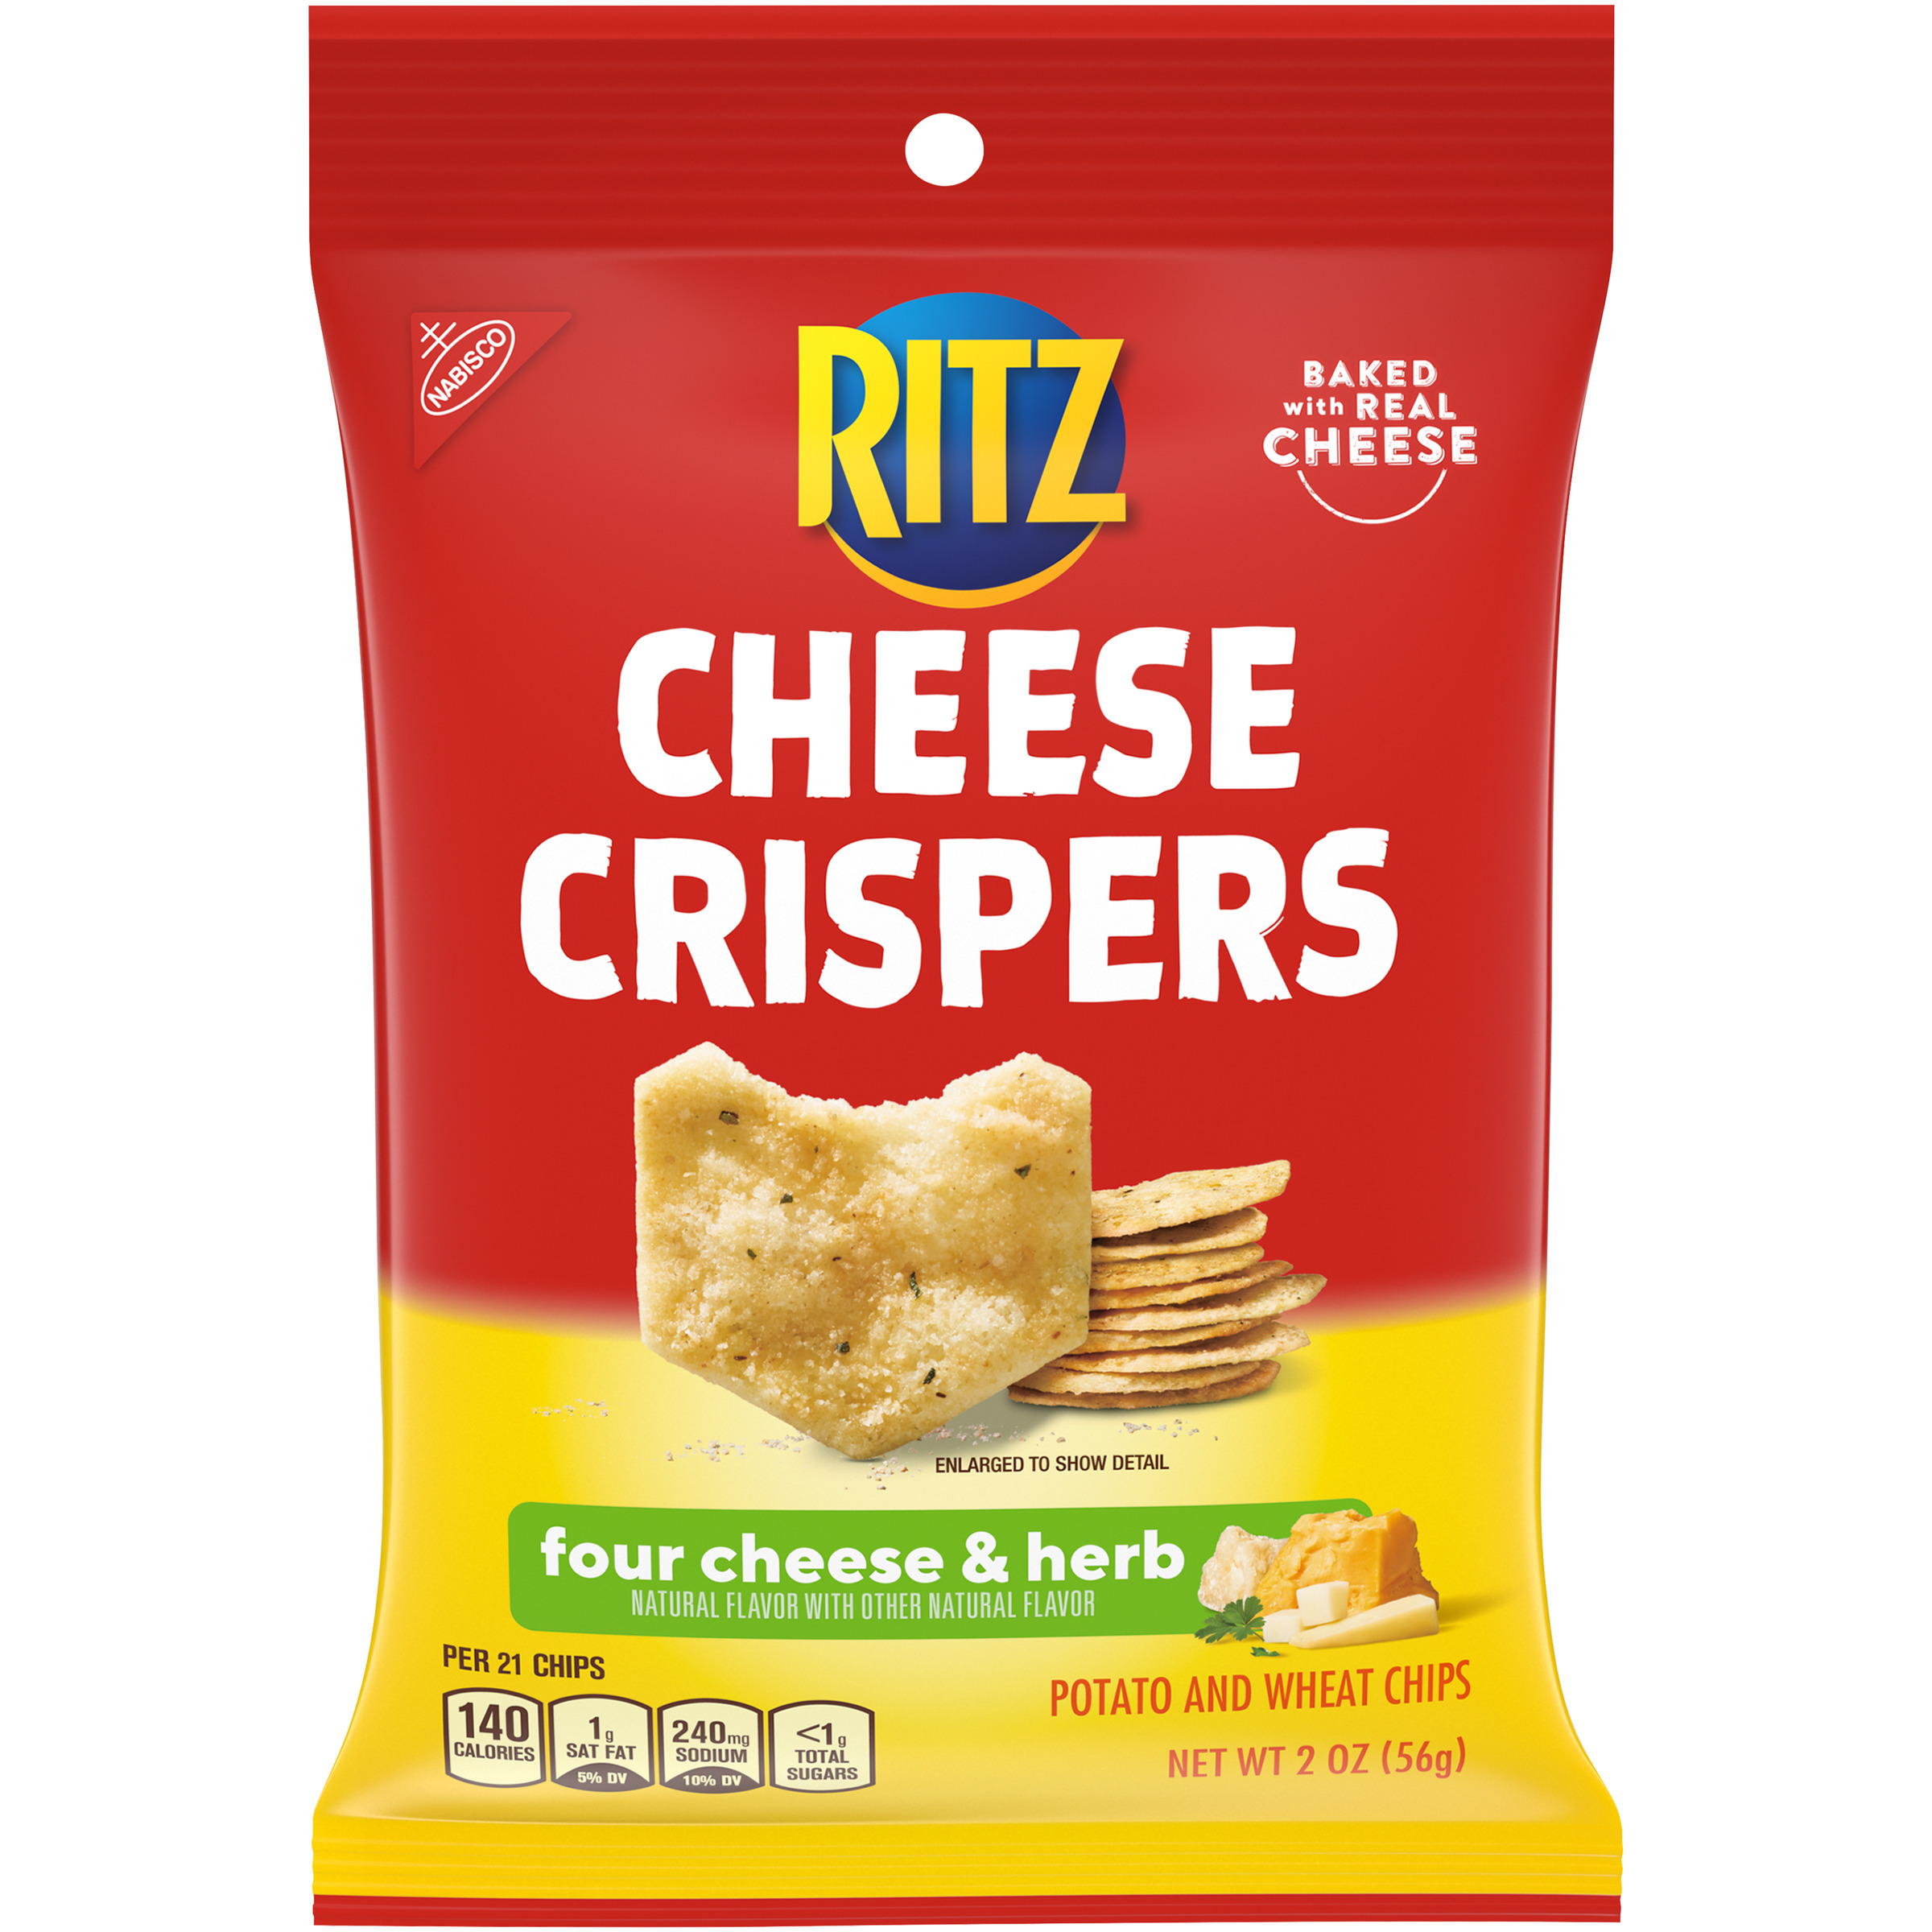 RITZ Cheese Crispers - Four Cheese and Herb Single Serve 24/2 OZ